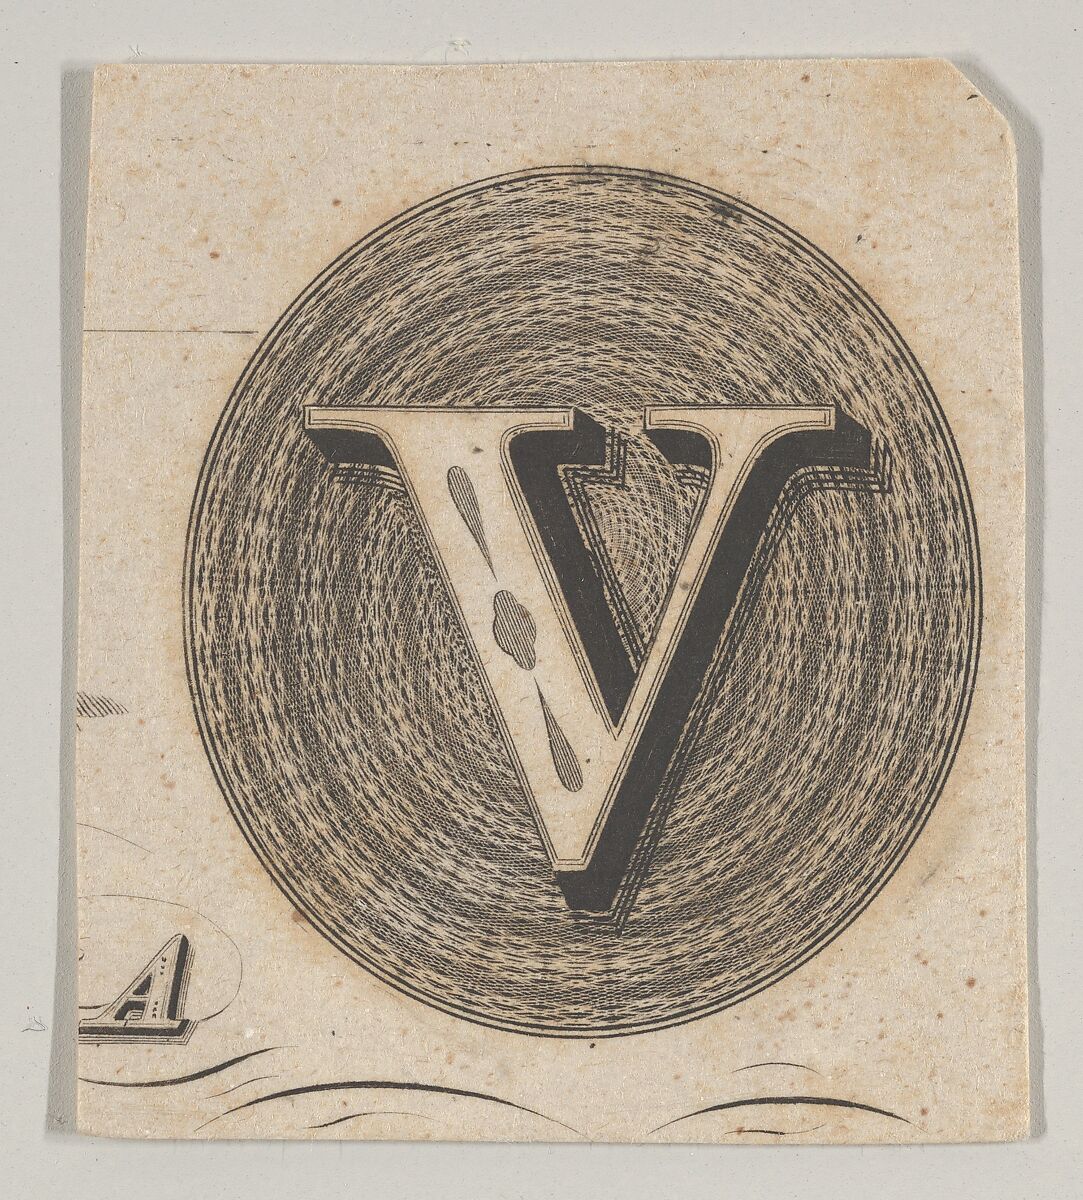 Banknote motif: capital V within an oval containing basket-like lathe work, Associated with Cyrus Durand (American, 1787–1868), Engraving; proof 